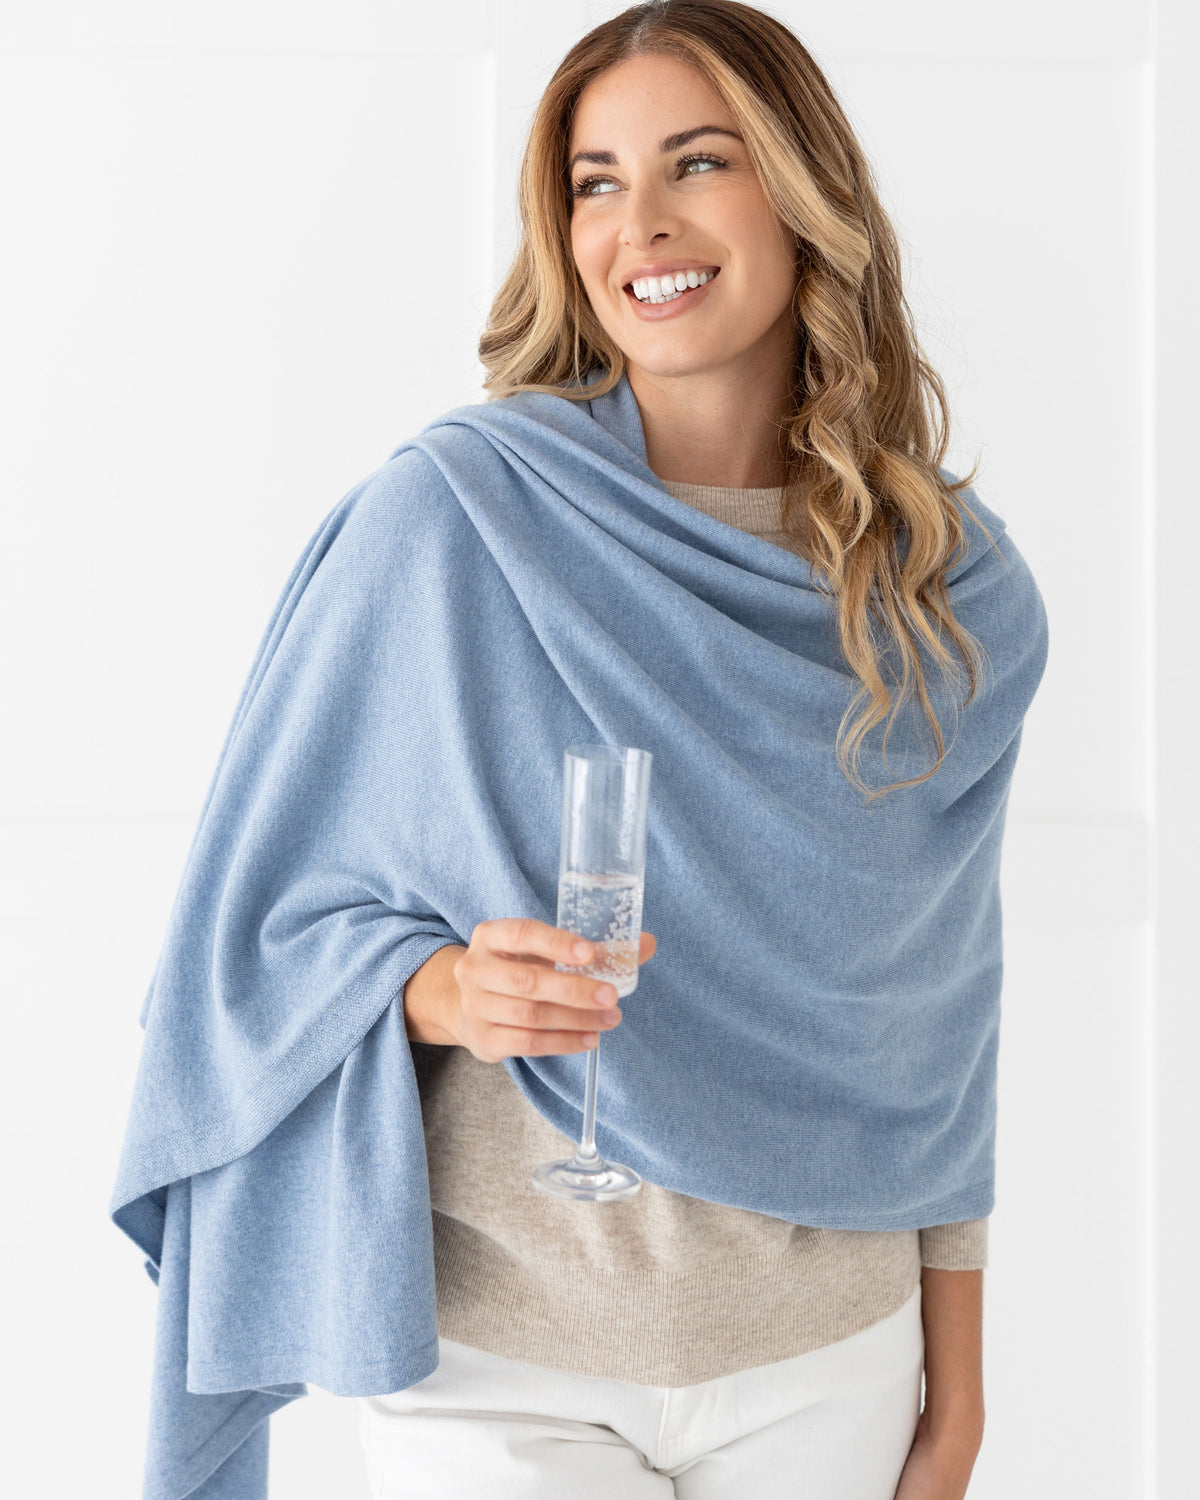 Woman wearing the Cashmere Cotton Luxe Travel Scarf in Horizon Blue which is a light blue scarf, with champagne glass in hand